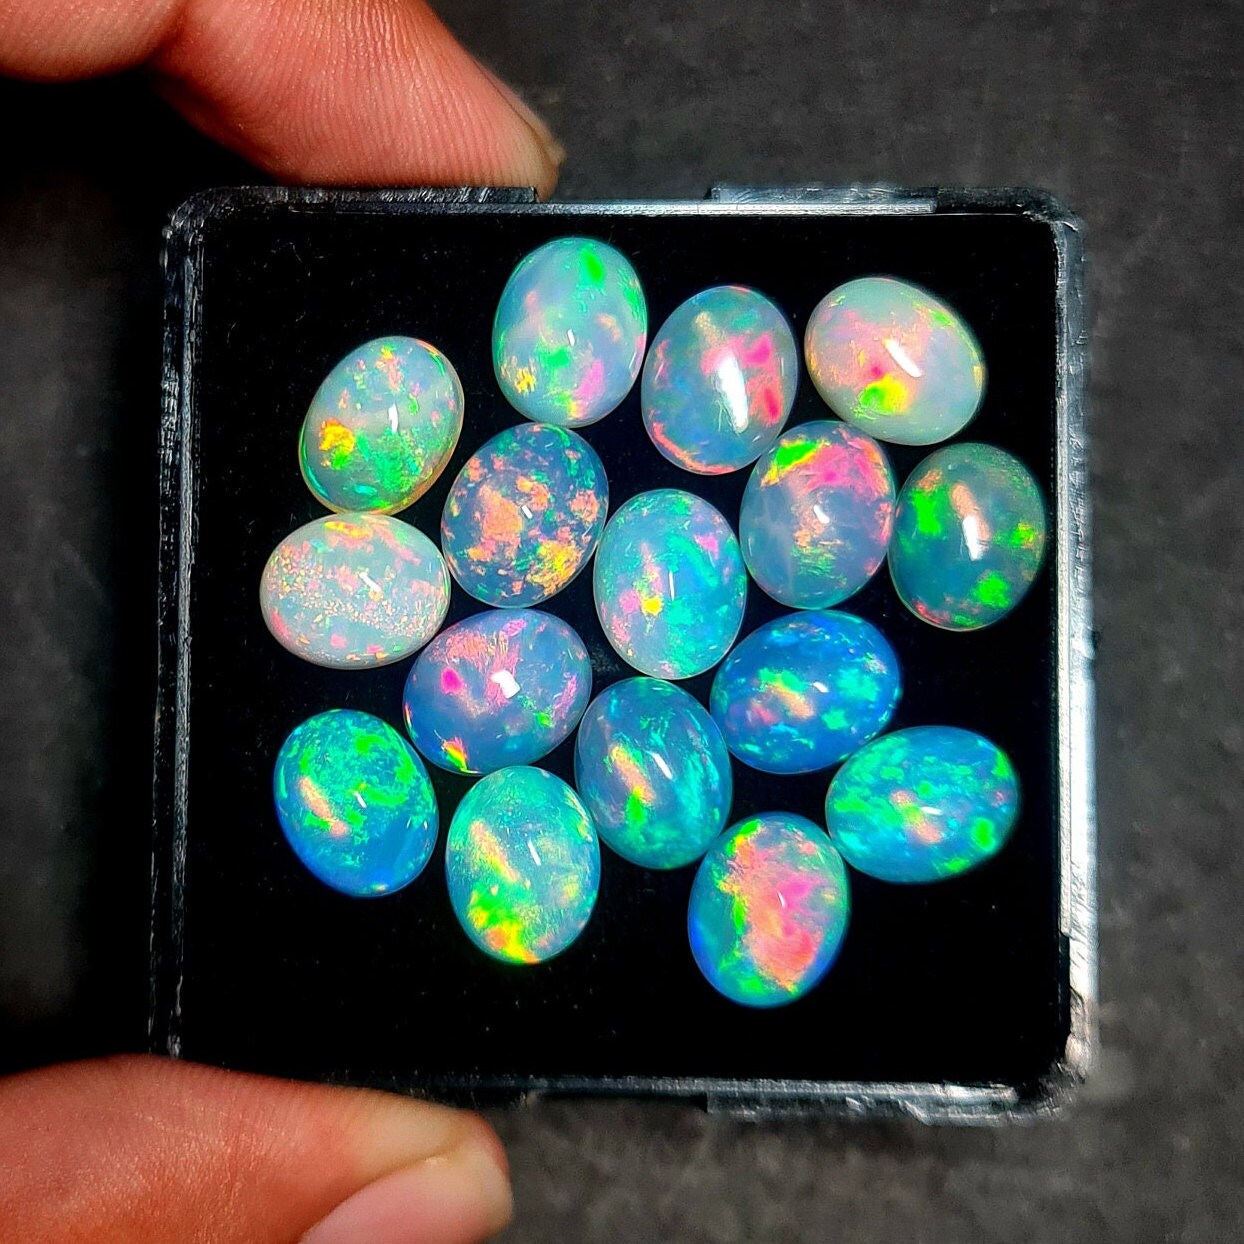 Beautiful Multi Play fire Ethiopian Opal 8x11 mm Oval Gemstone Cabochon, Calibrated Opal Stone, Natural Fire Opal Loose Stone For Jewelry Making.